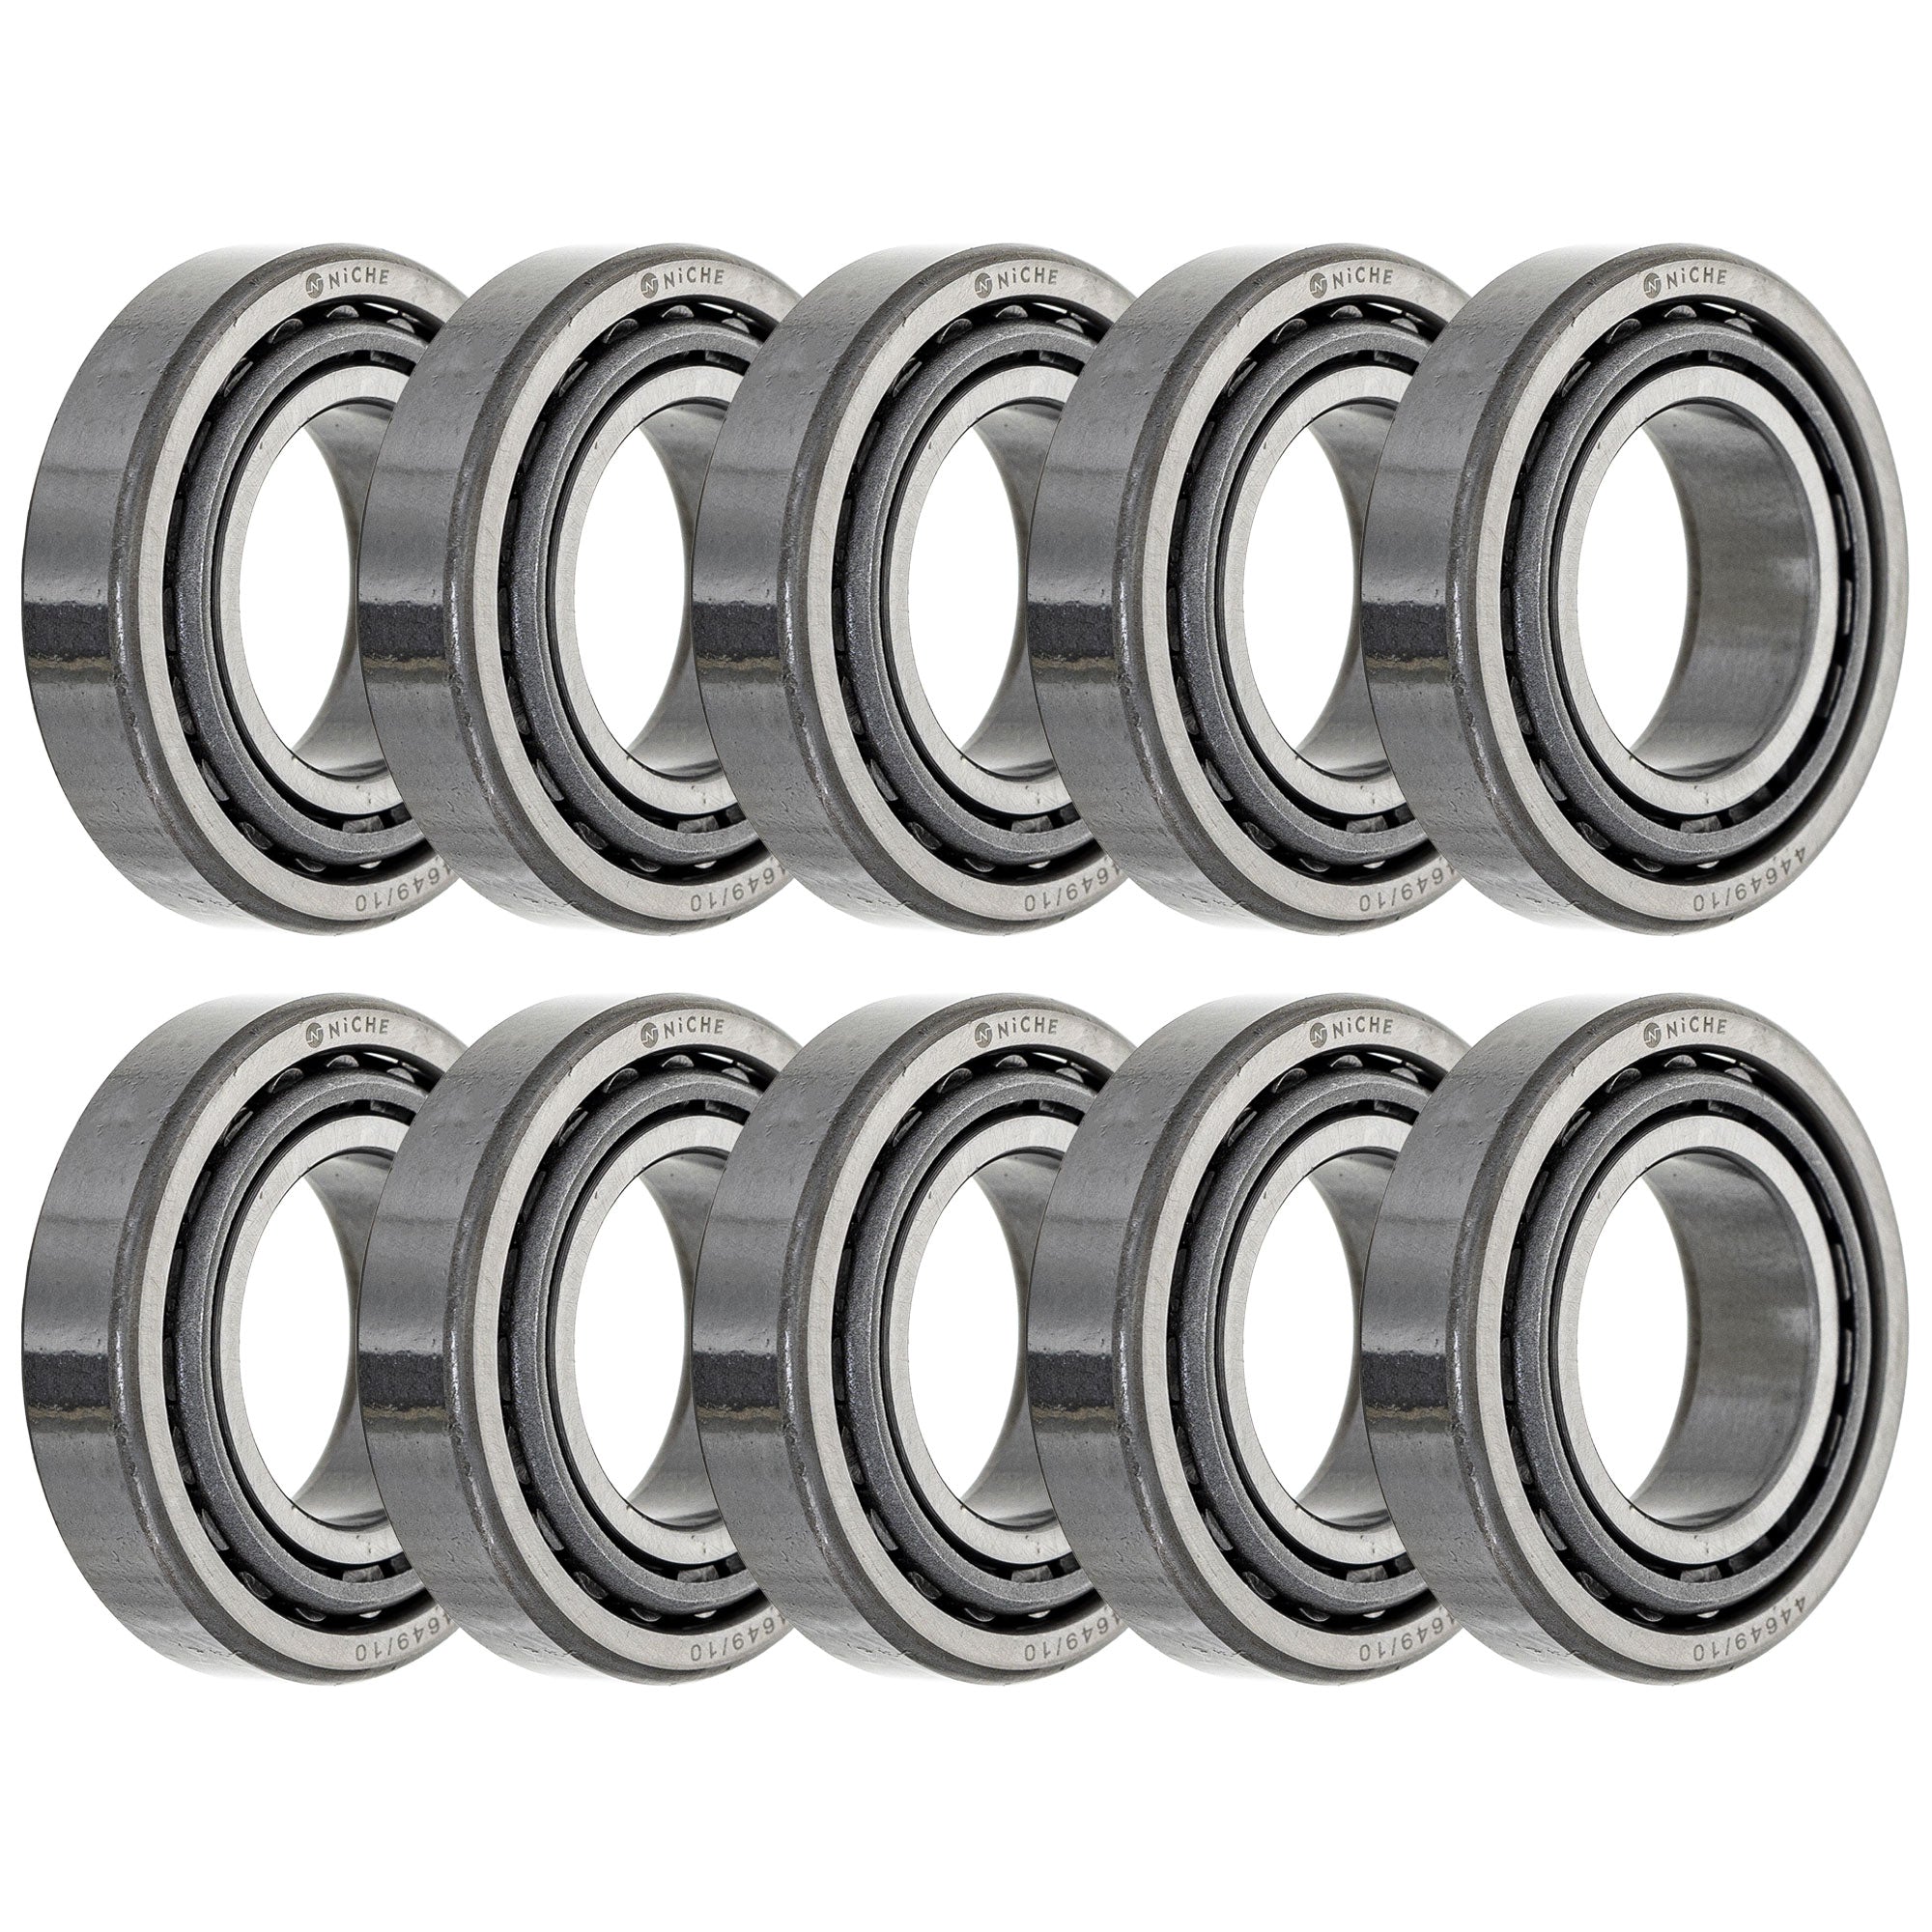 Tapered Roller Bearing Pack of 10 10-Pack for zOTHER Xplorer Xpedition Worker Trail-Boss NICHE 519-CBB2268R